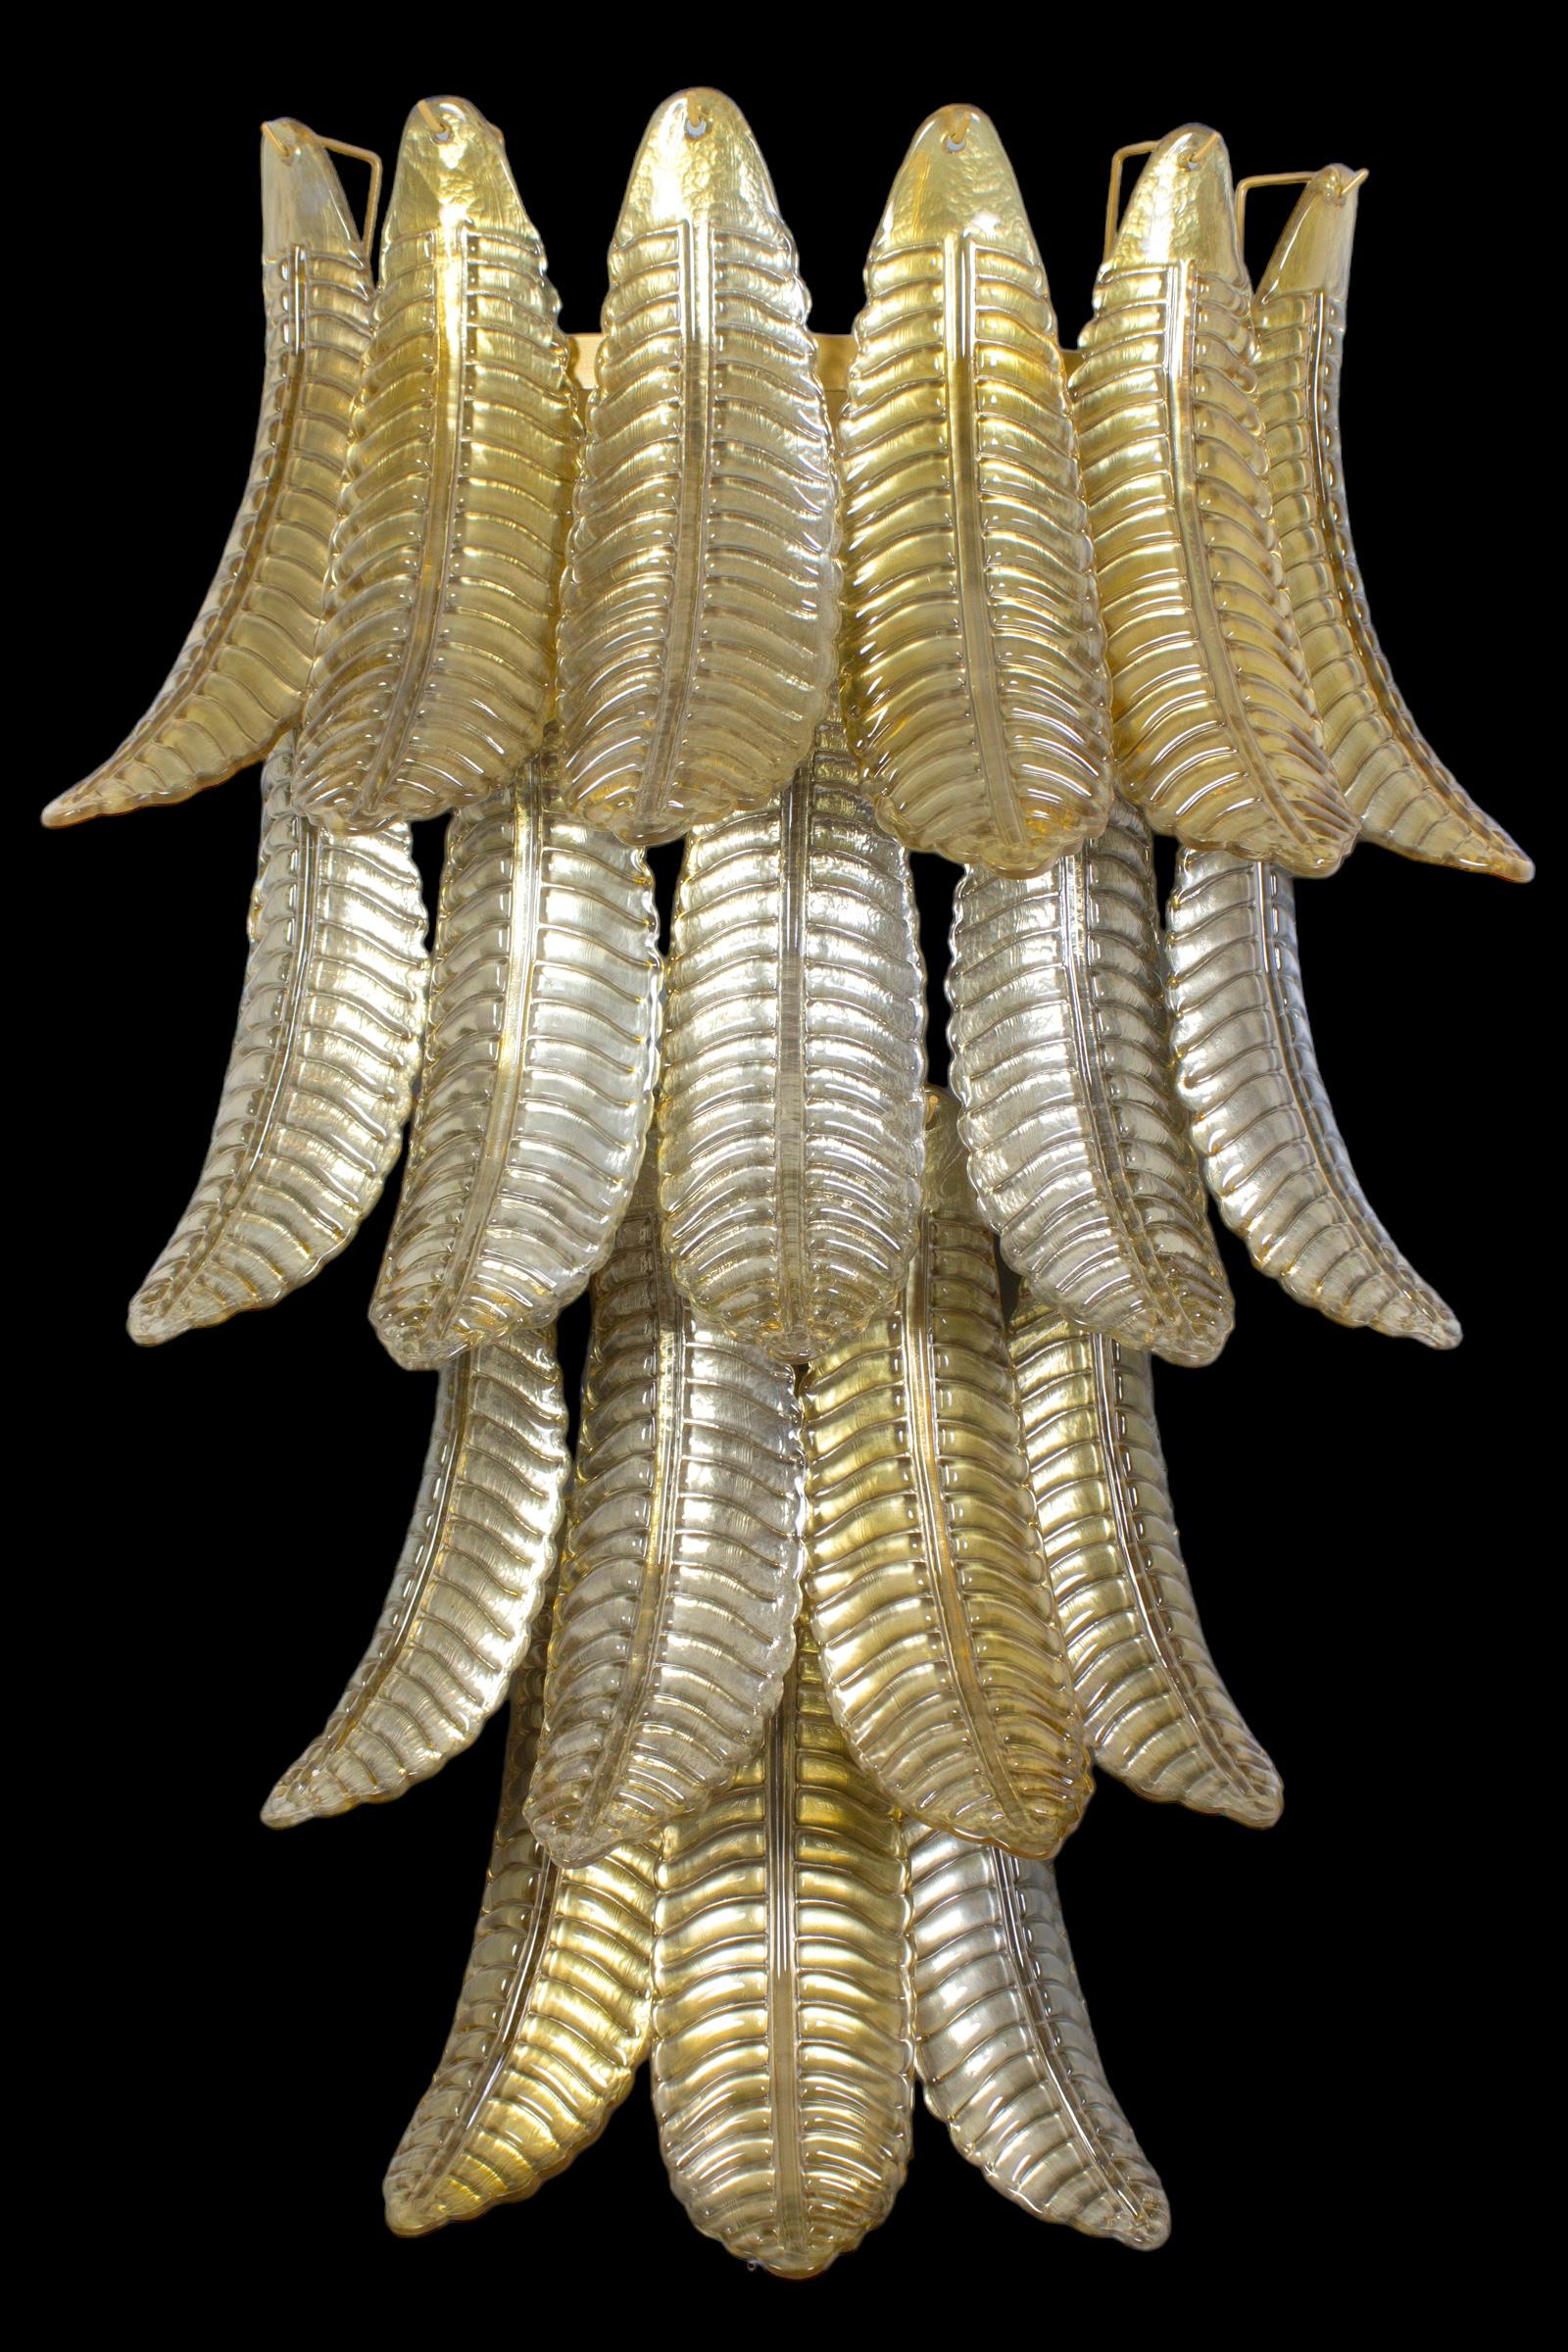 Pair of  large gold fern  Murano glass leave sconces with brass fittings.
Glasses are in perfect condition. 
Three  are 9 E 14 light bulbs. We can wire for your country standards.
This light fixture can be disassembled and the glasses individually